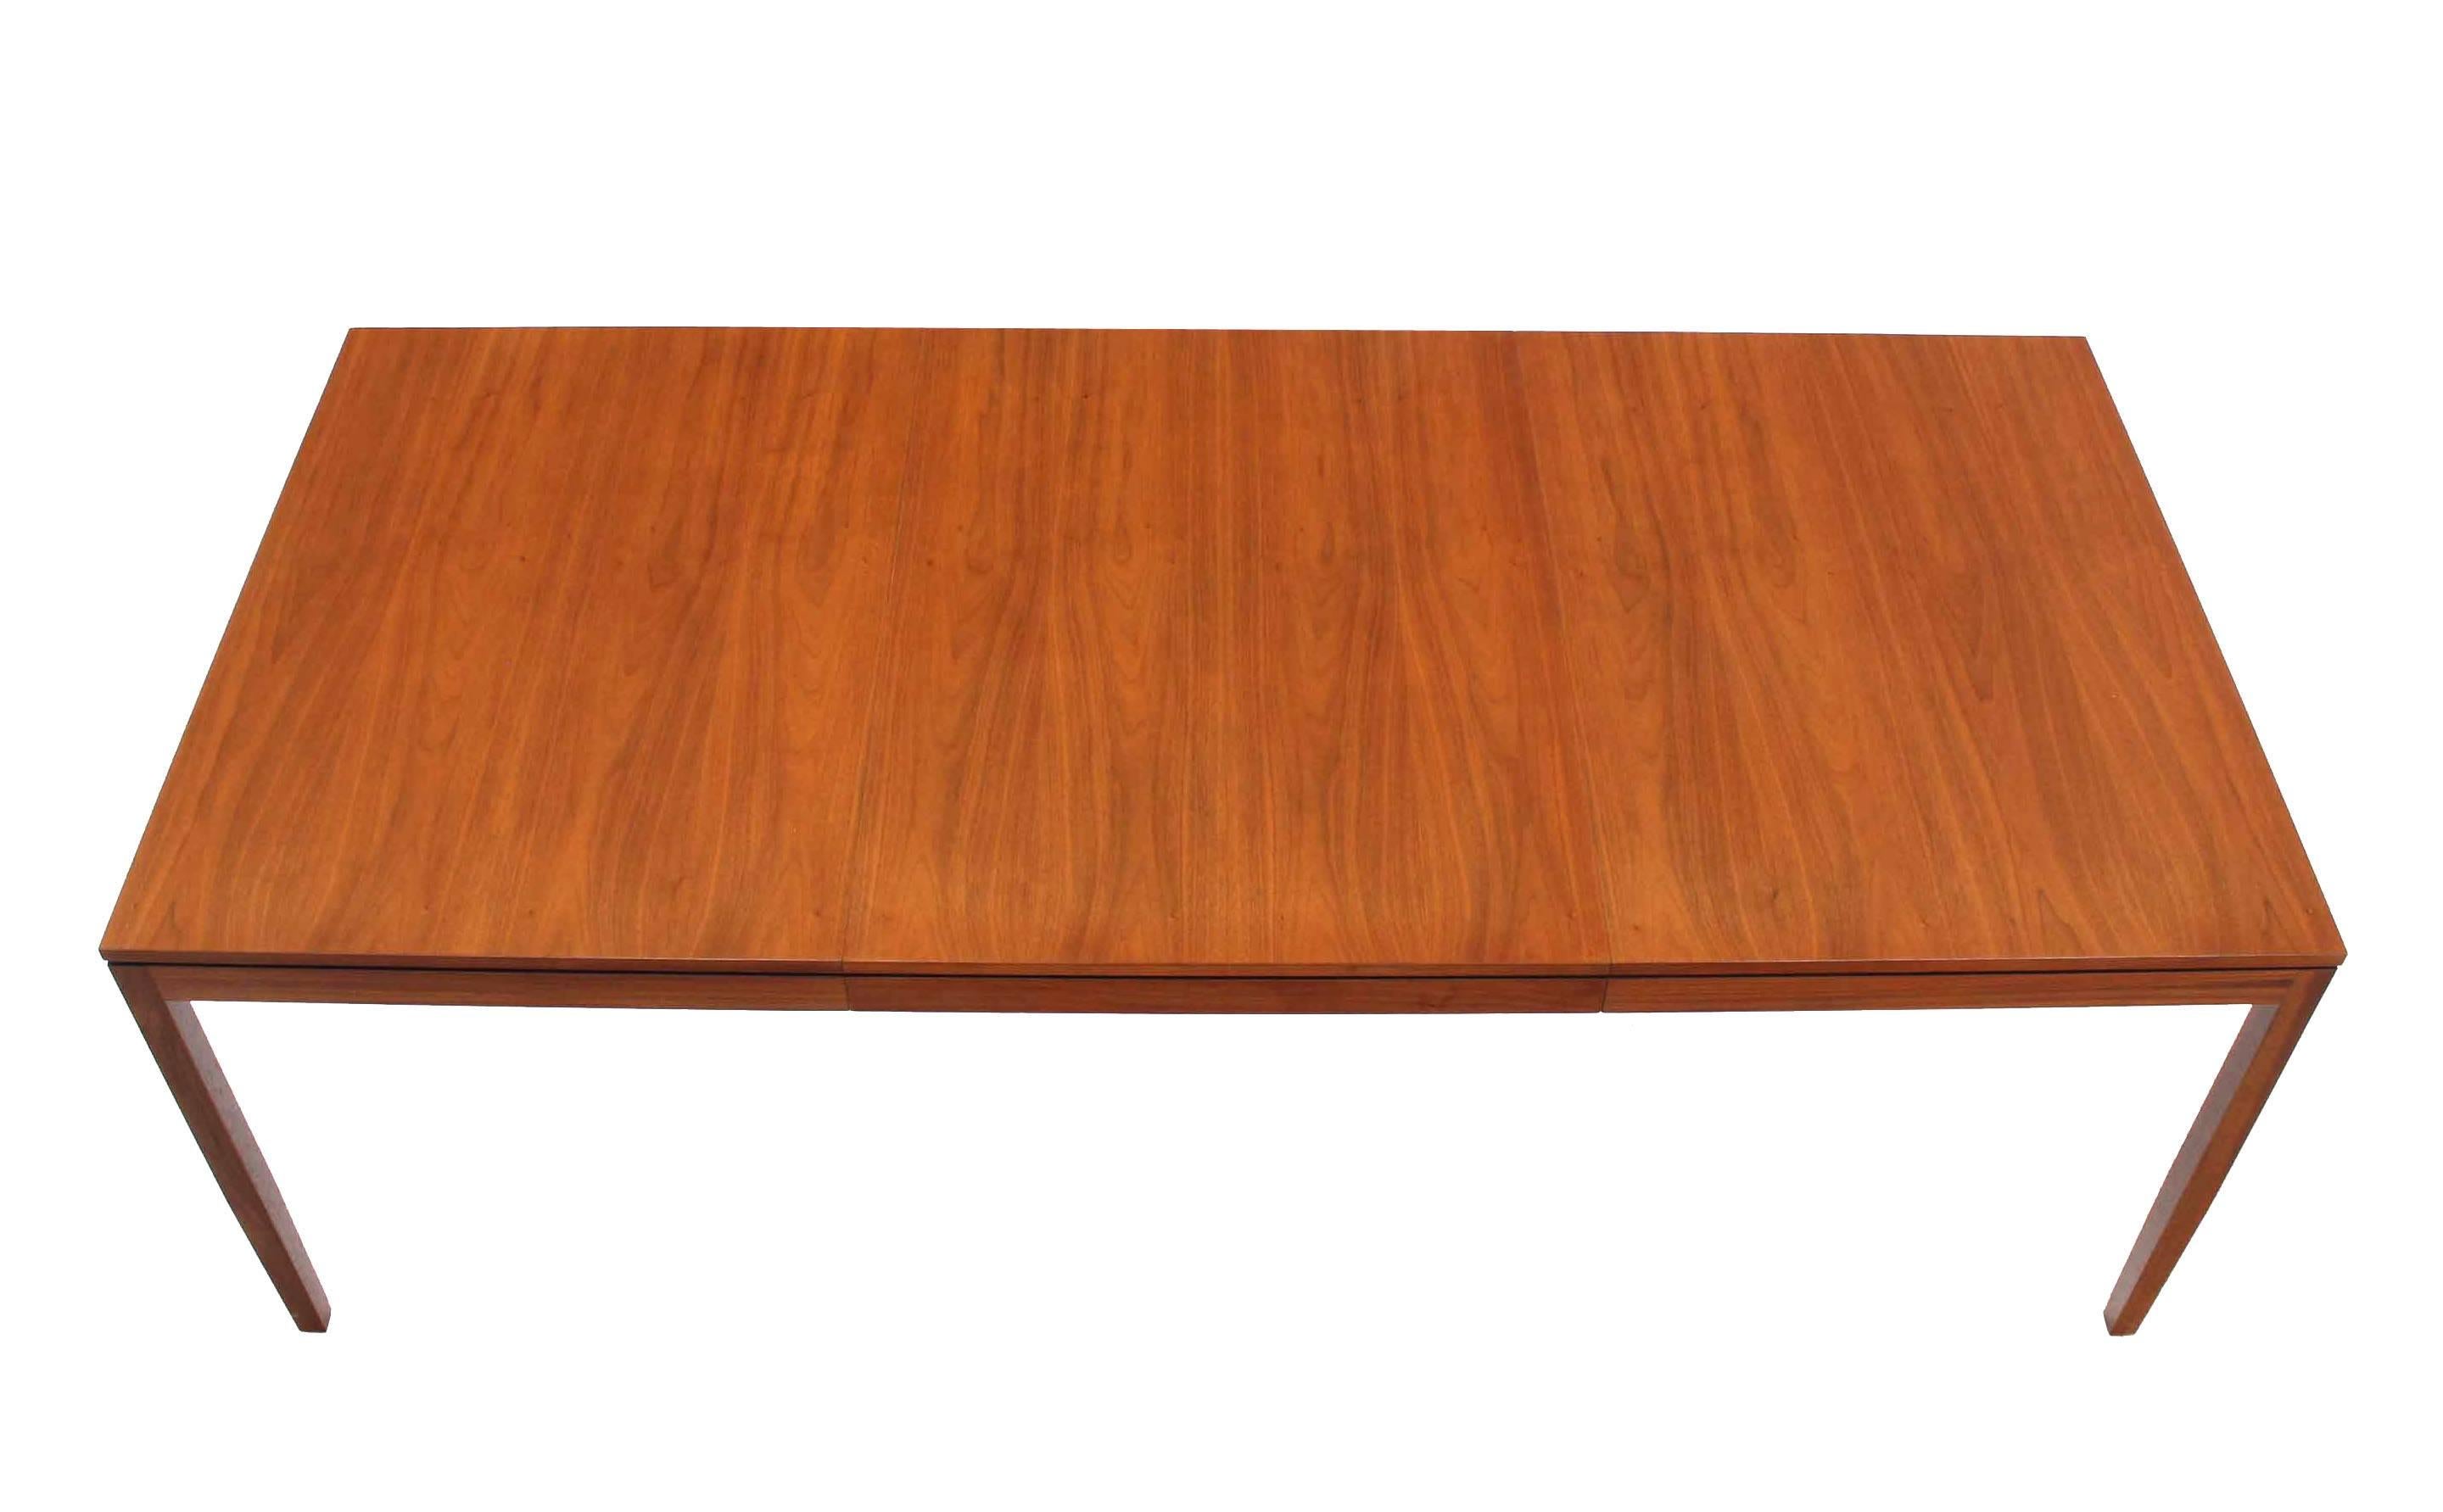 American Outstanding Quality Walnut Dining Room Table by Knoll